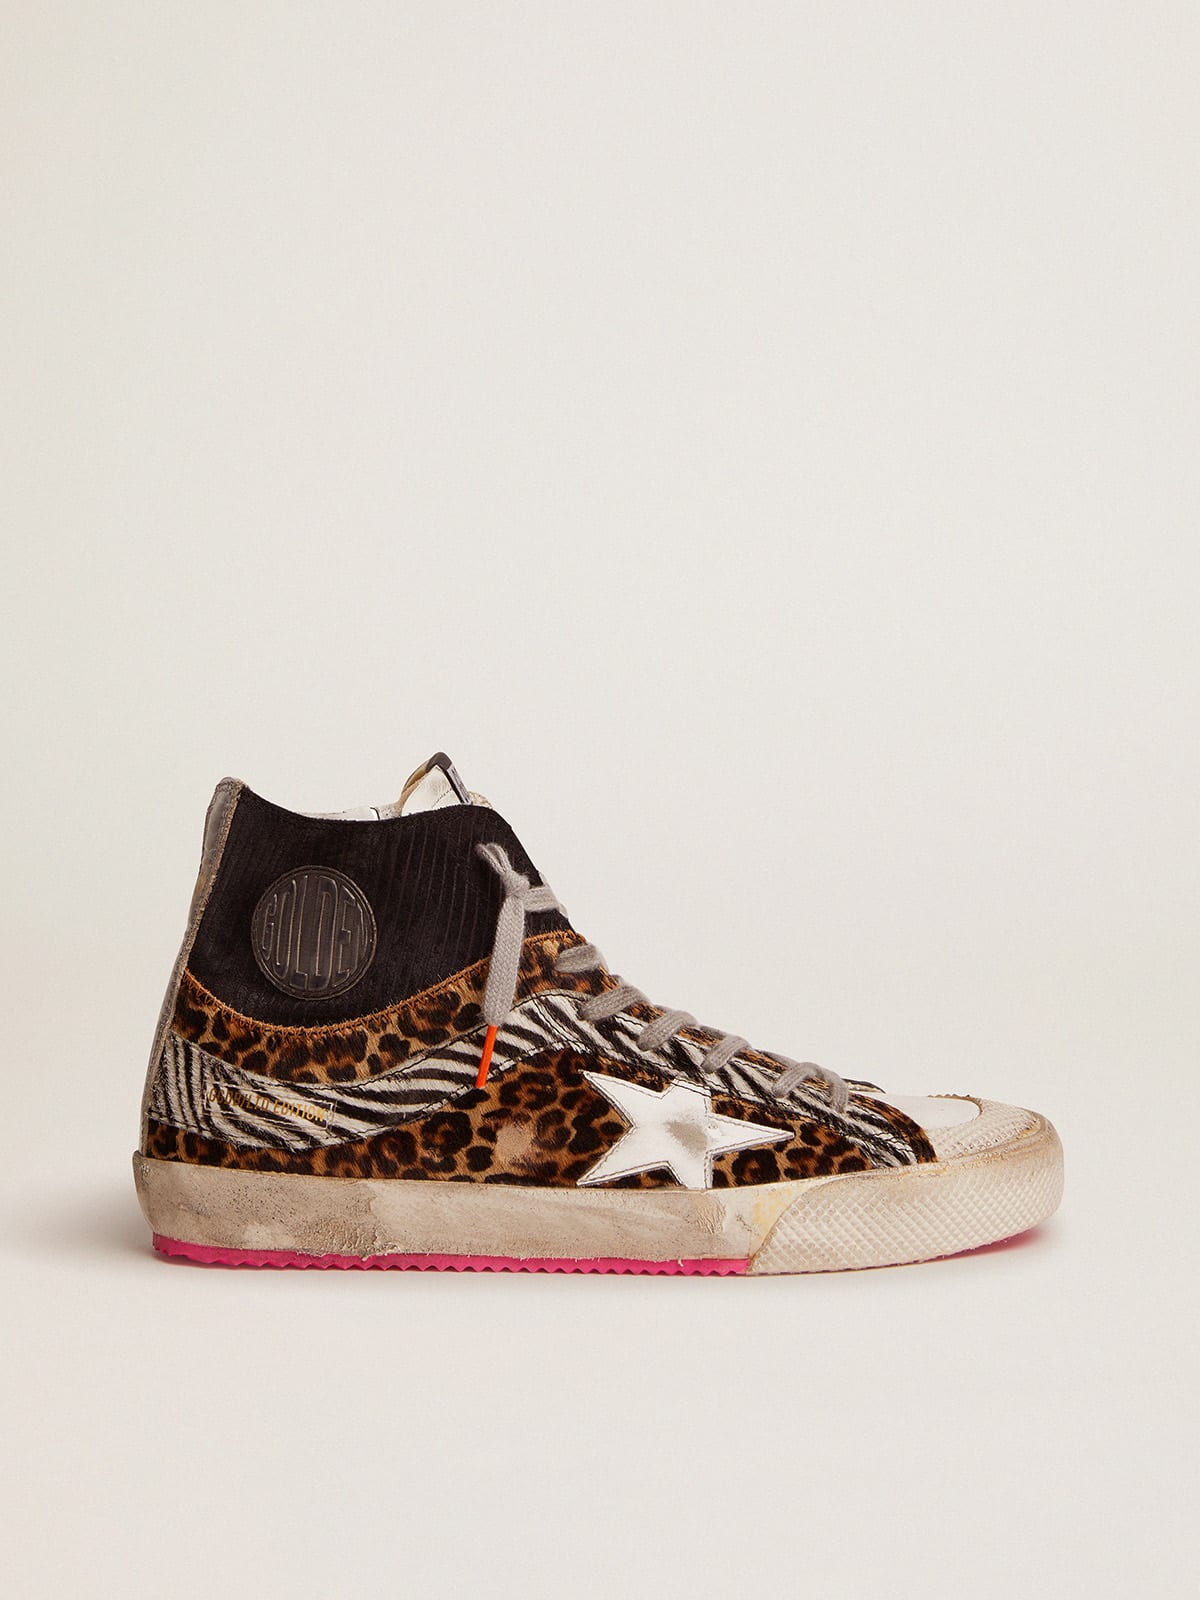 Golden Goose - Women’s Francy LAB sneakers with printed suede pony-skin upper in 